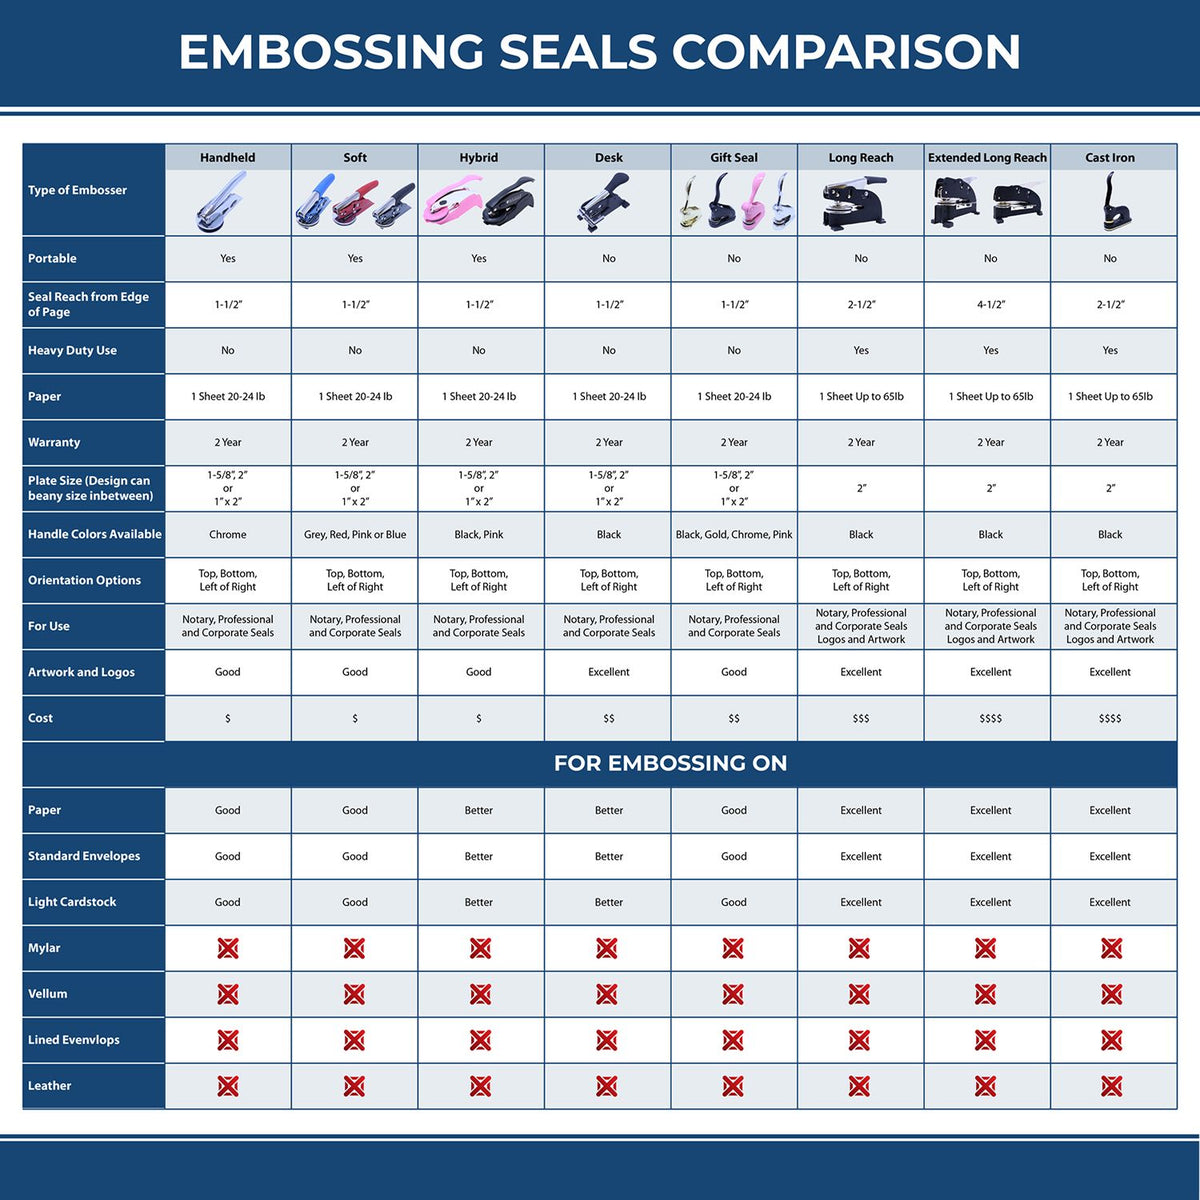 A comparison chart for the different types of mount models available for the Hybrid Colorado Architect Seal